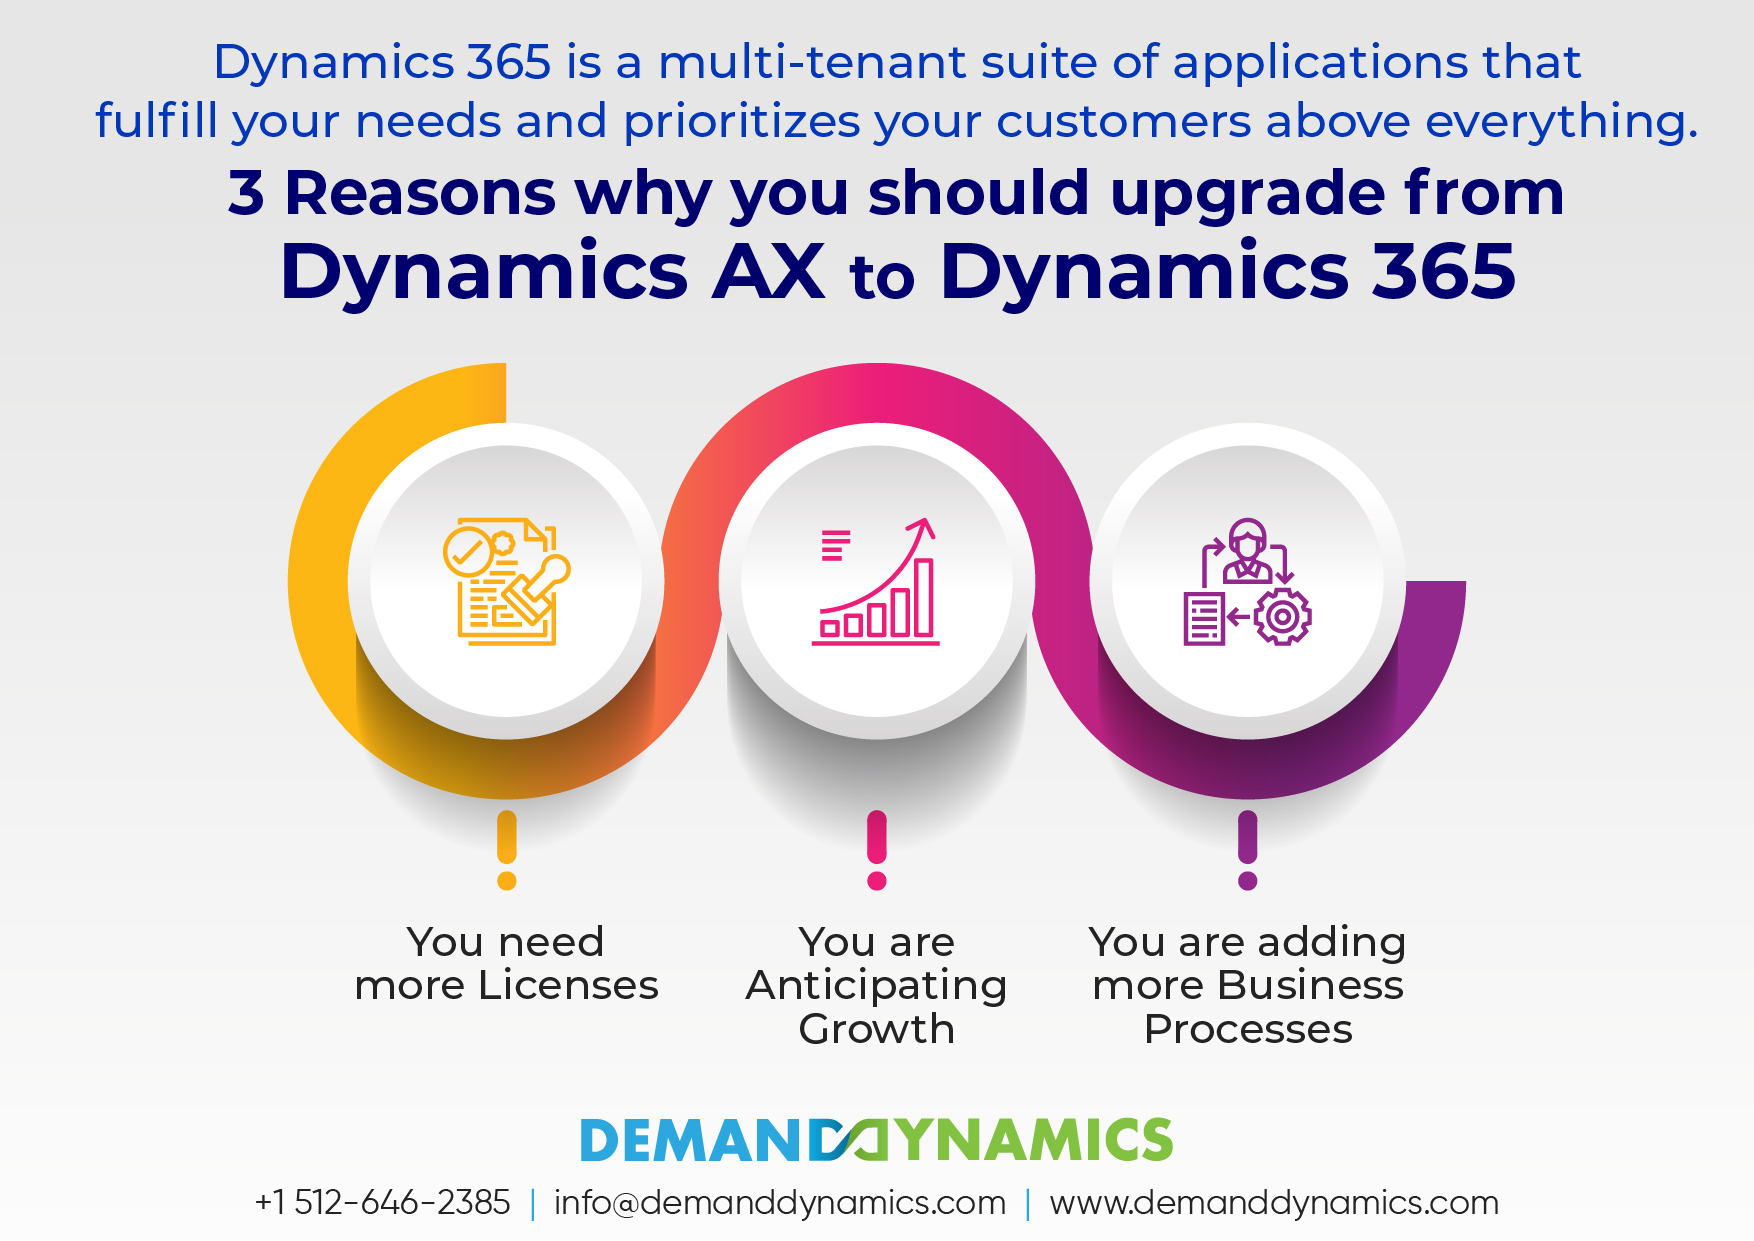 Upgrading to Dynamics 365